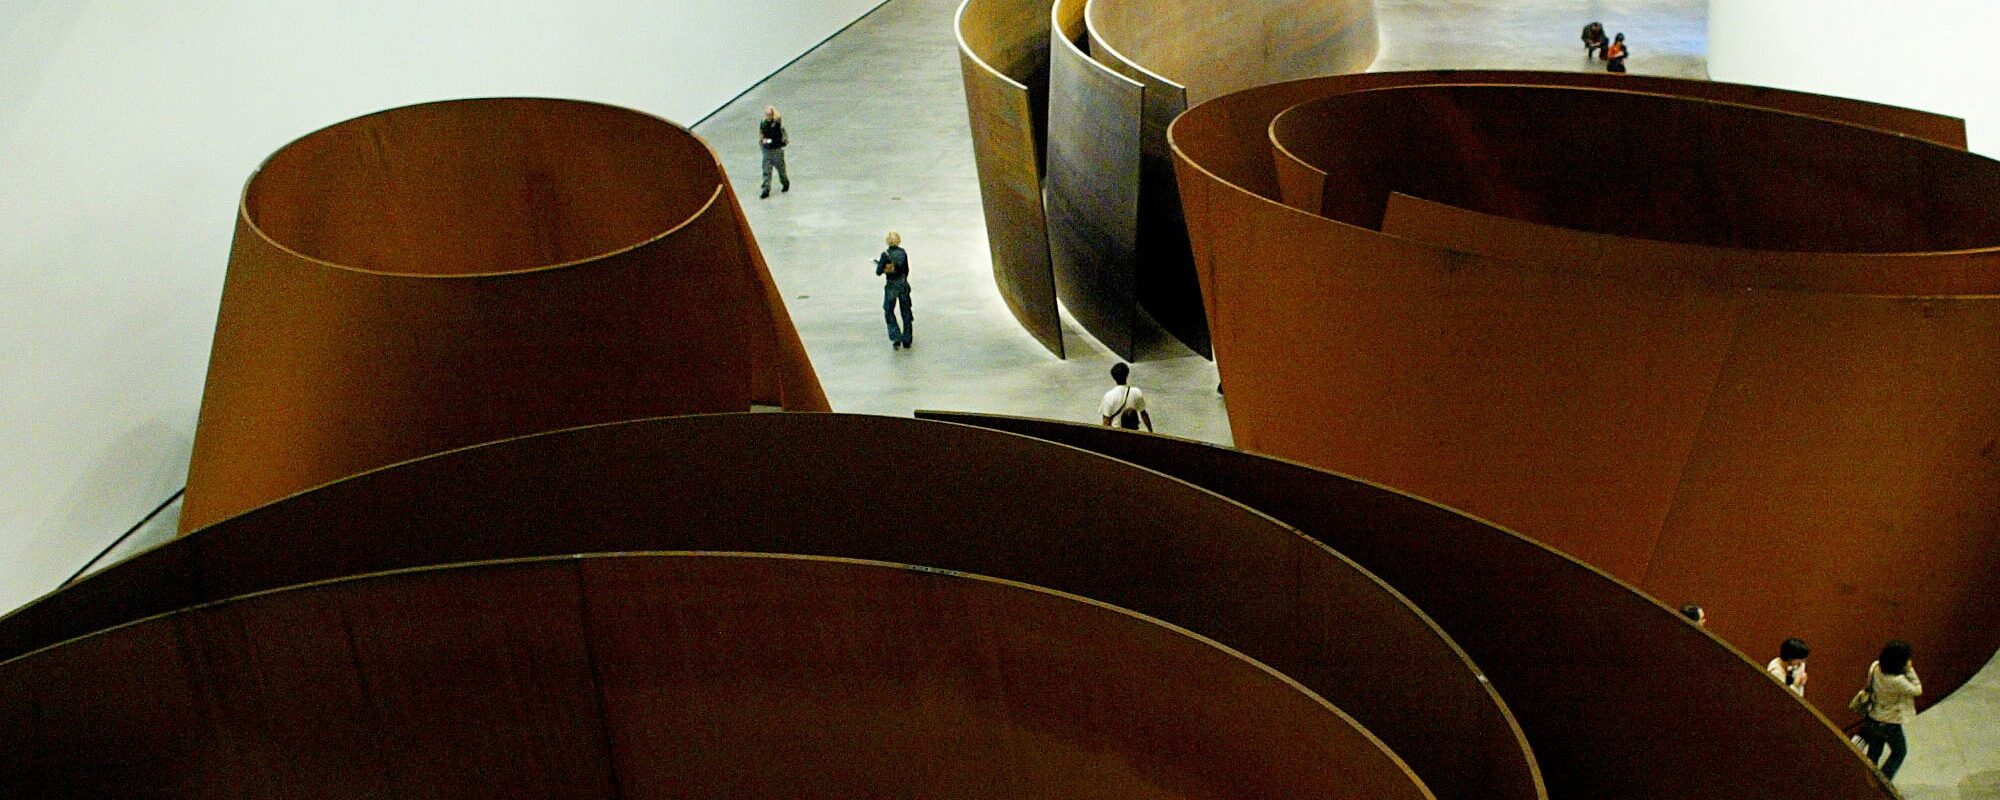 Richard Serra, famed for his massive steel sculptures, has passed away at the age of 85